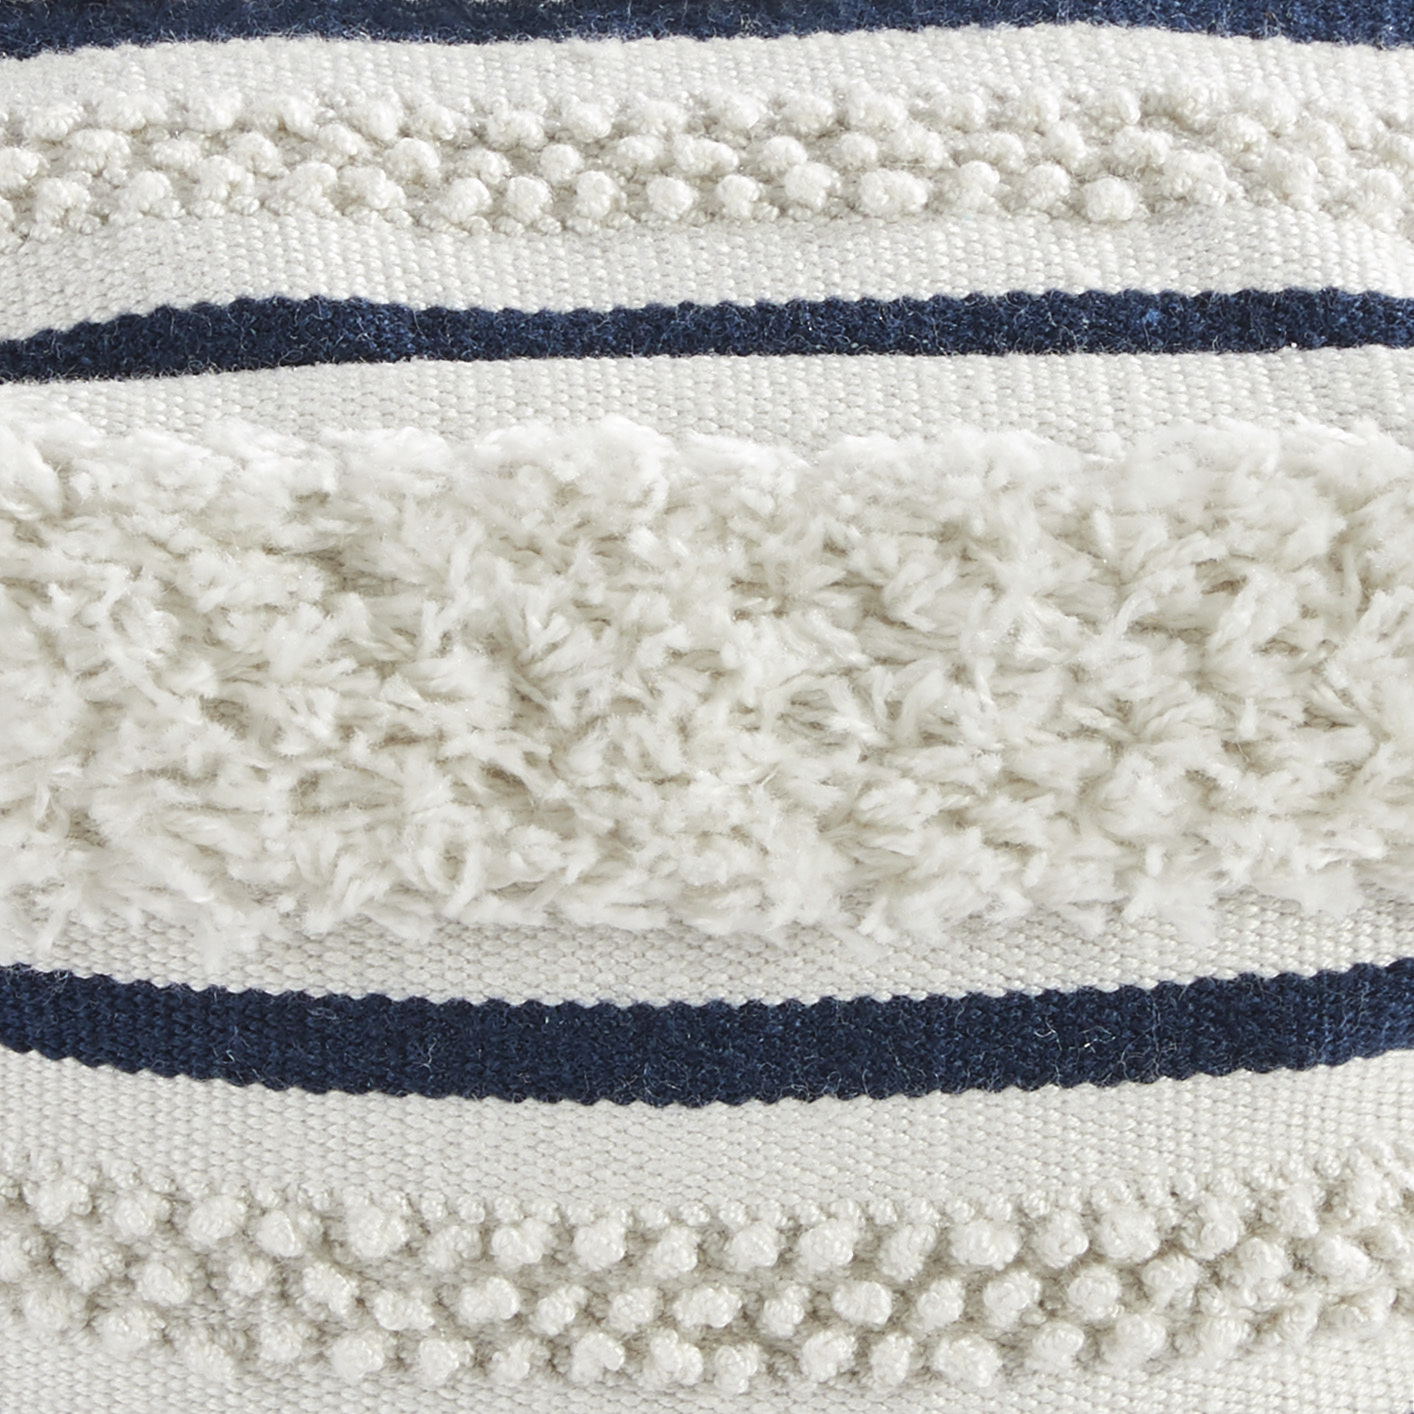 BH&G Outdoor Woven, Blue and White Stripe Pouf - Walmart.com